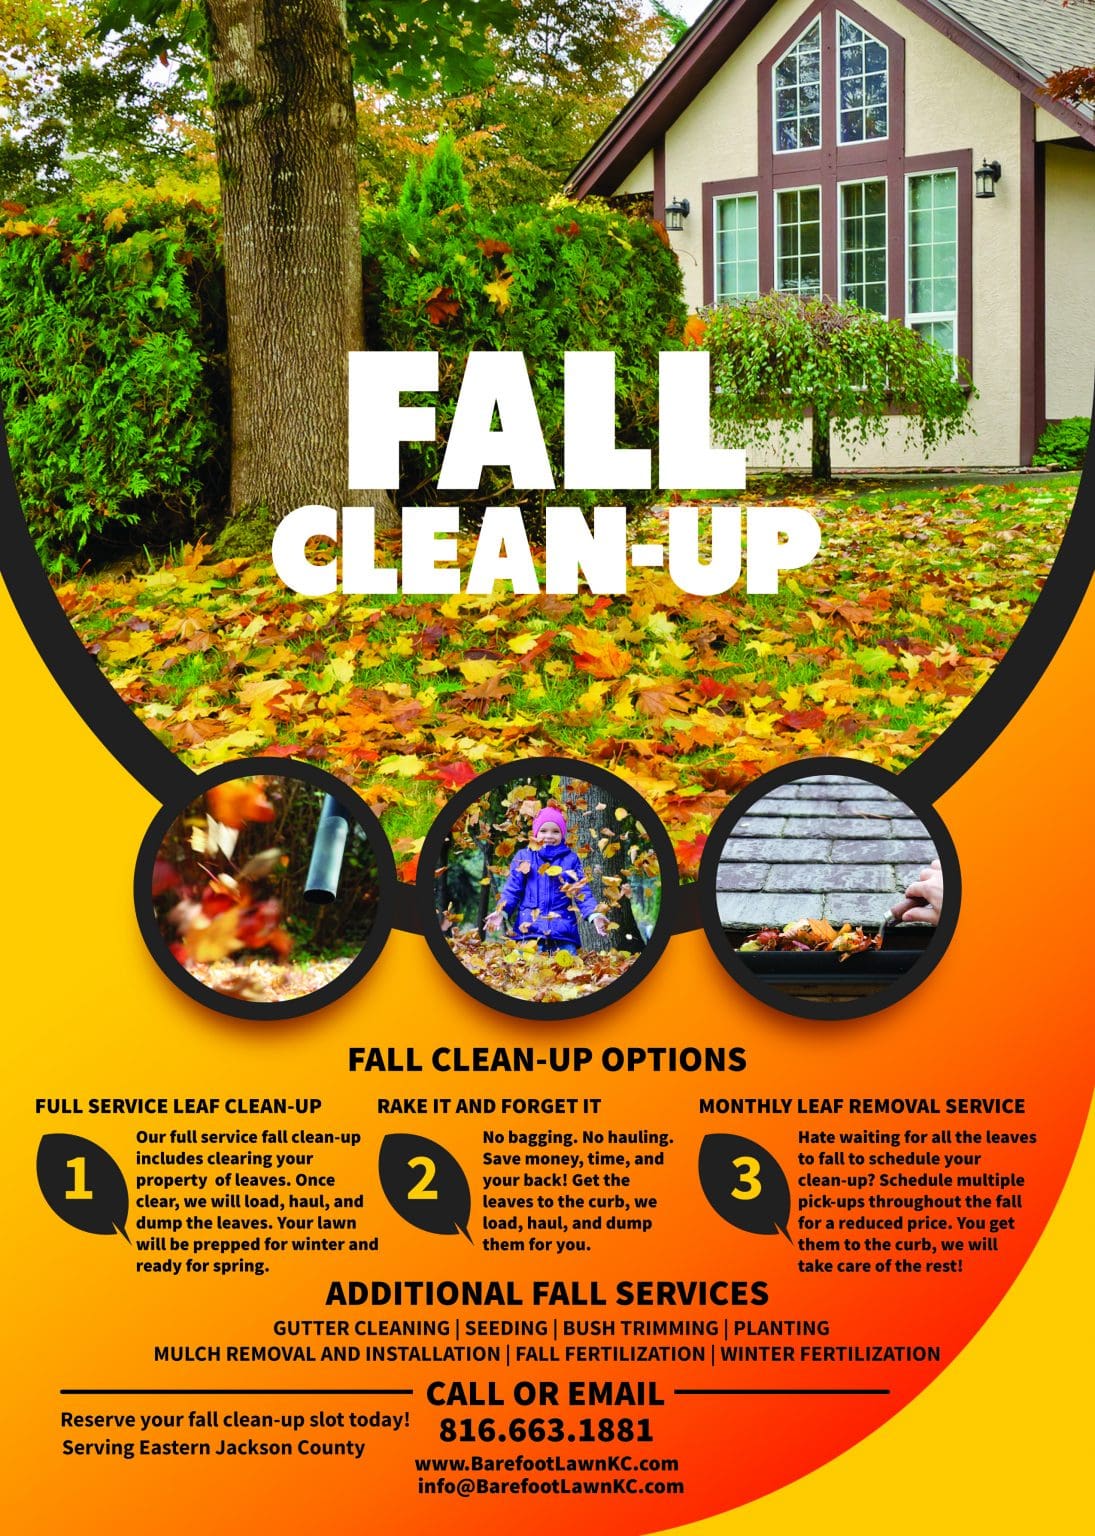 fall-cleanup-and-lawn-services-barefoot-lawn-care-kansas-city